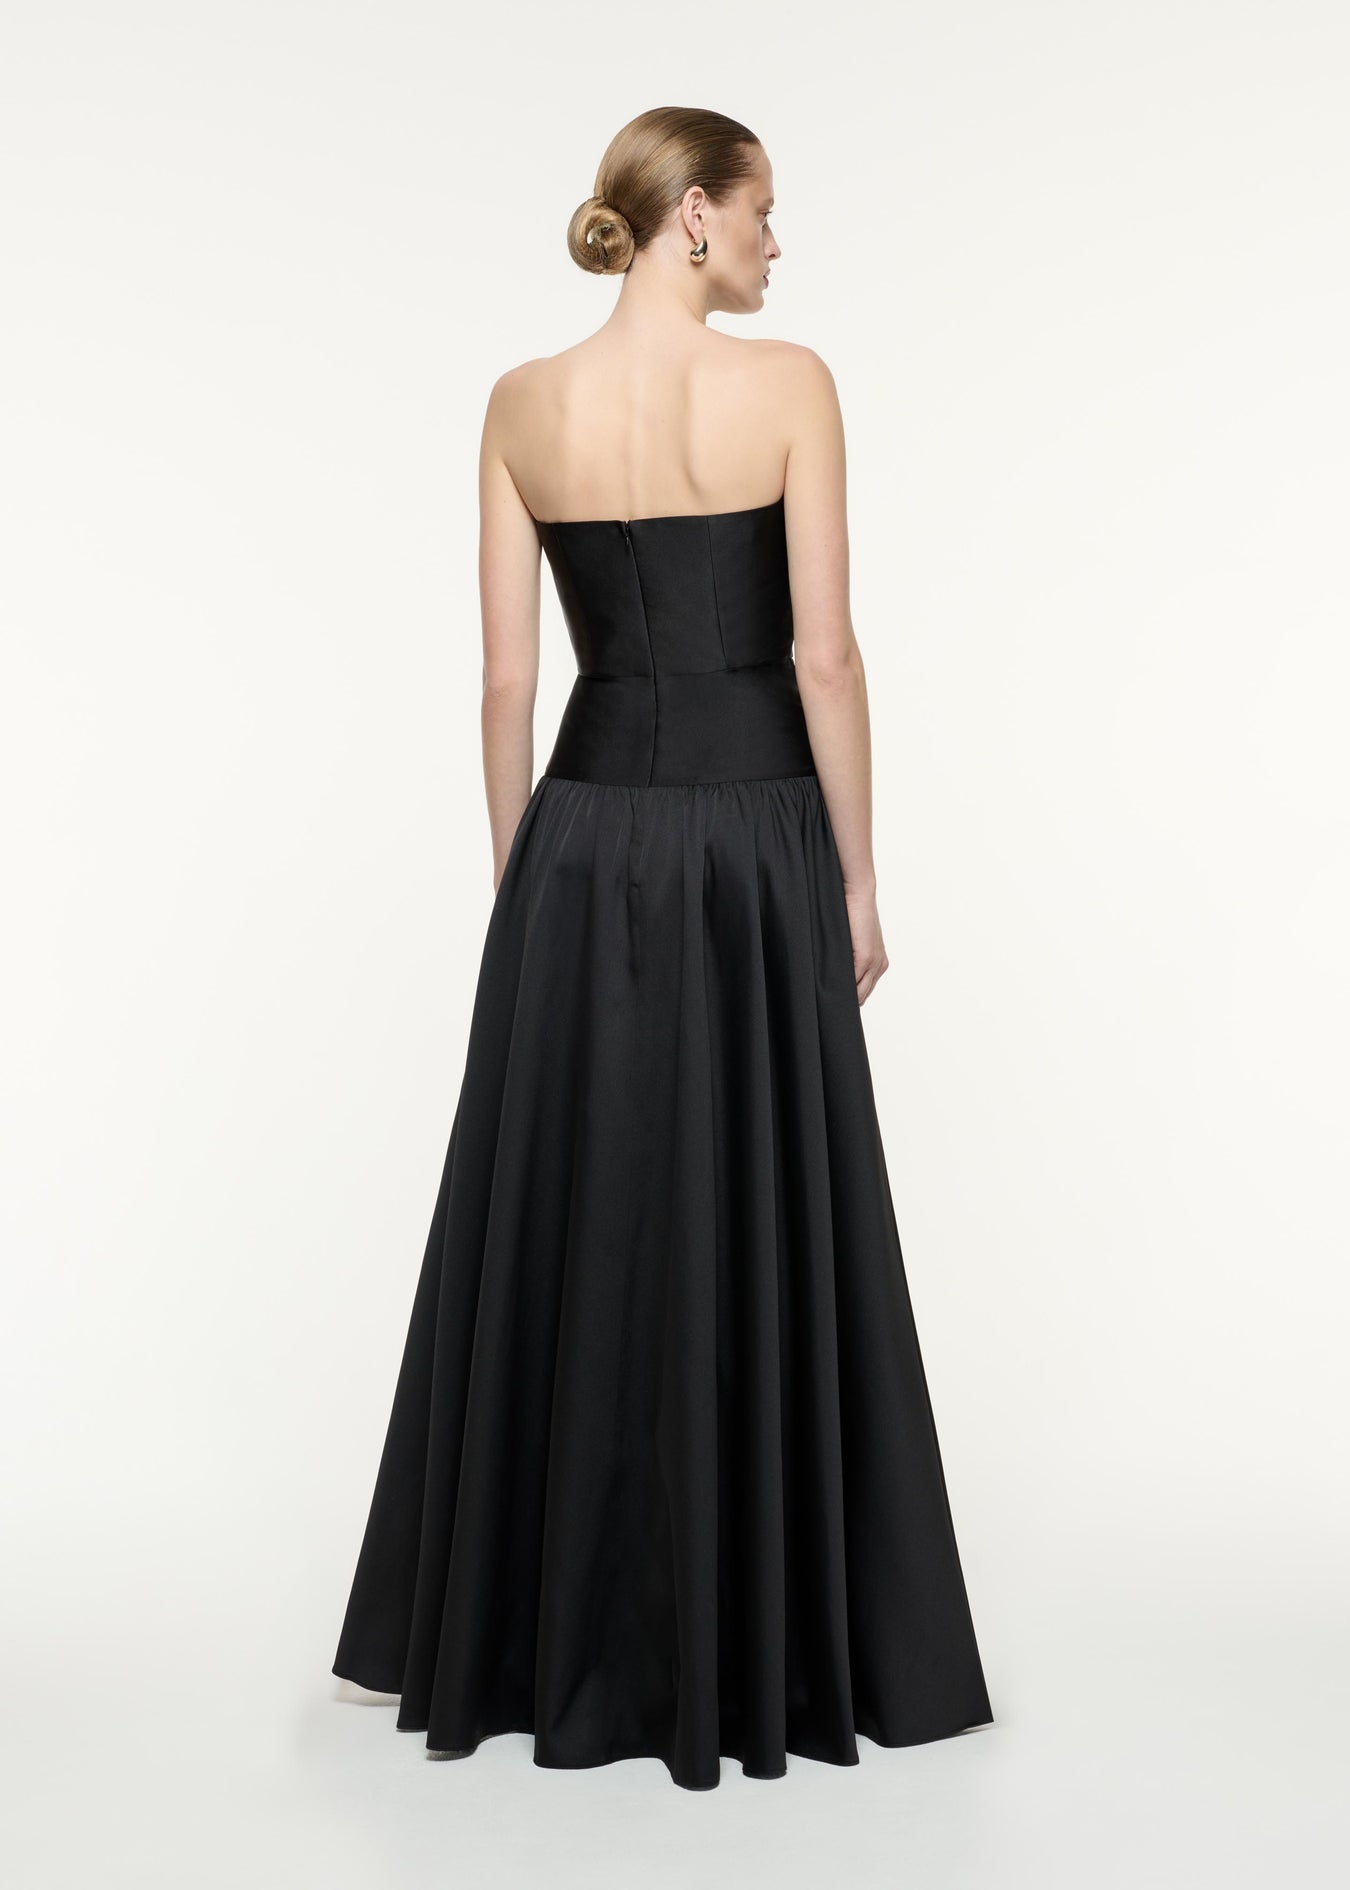 A back view image of a model wearing the Strapless Taffeta Gown in Black